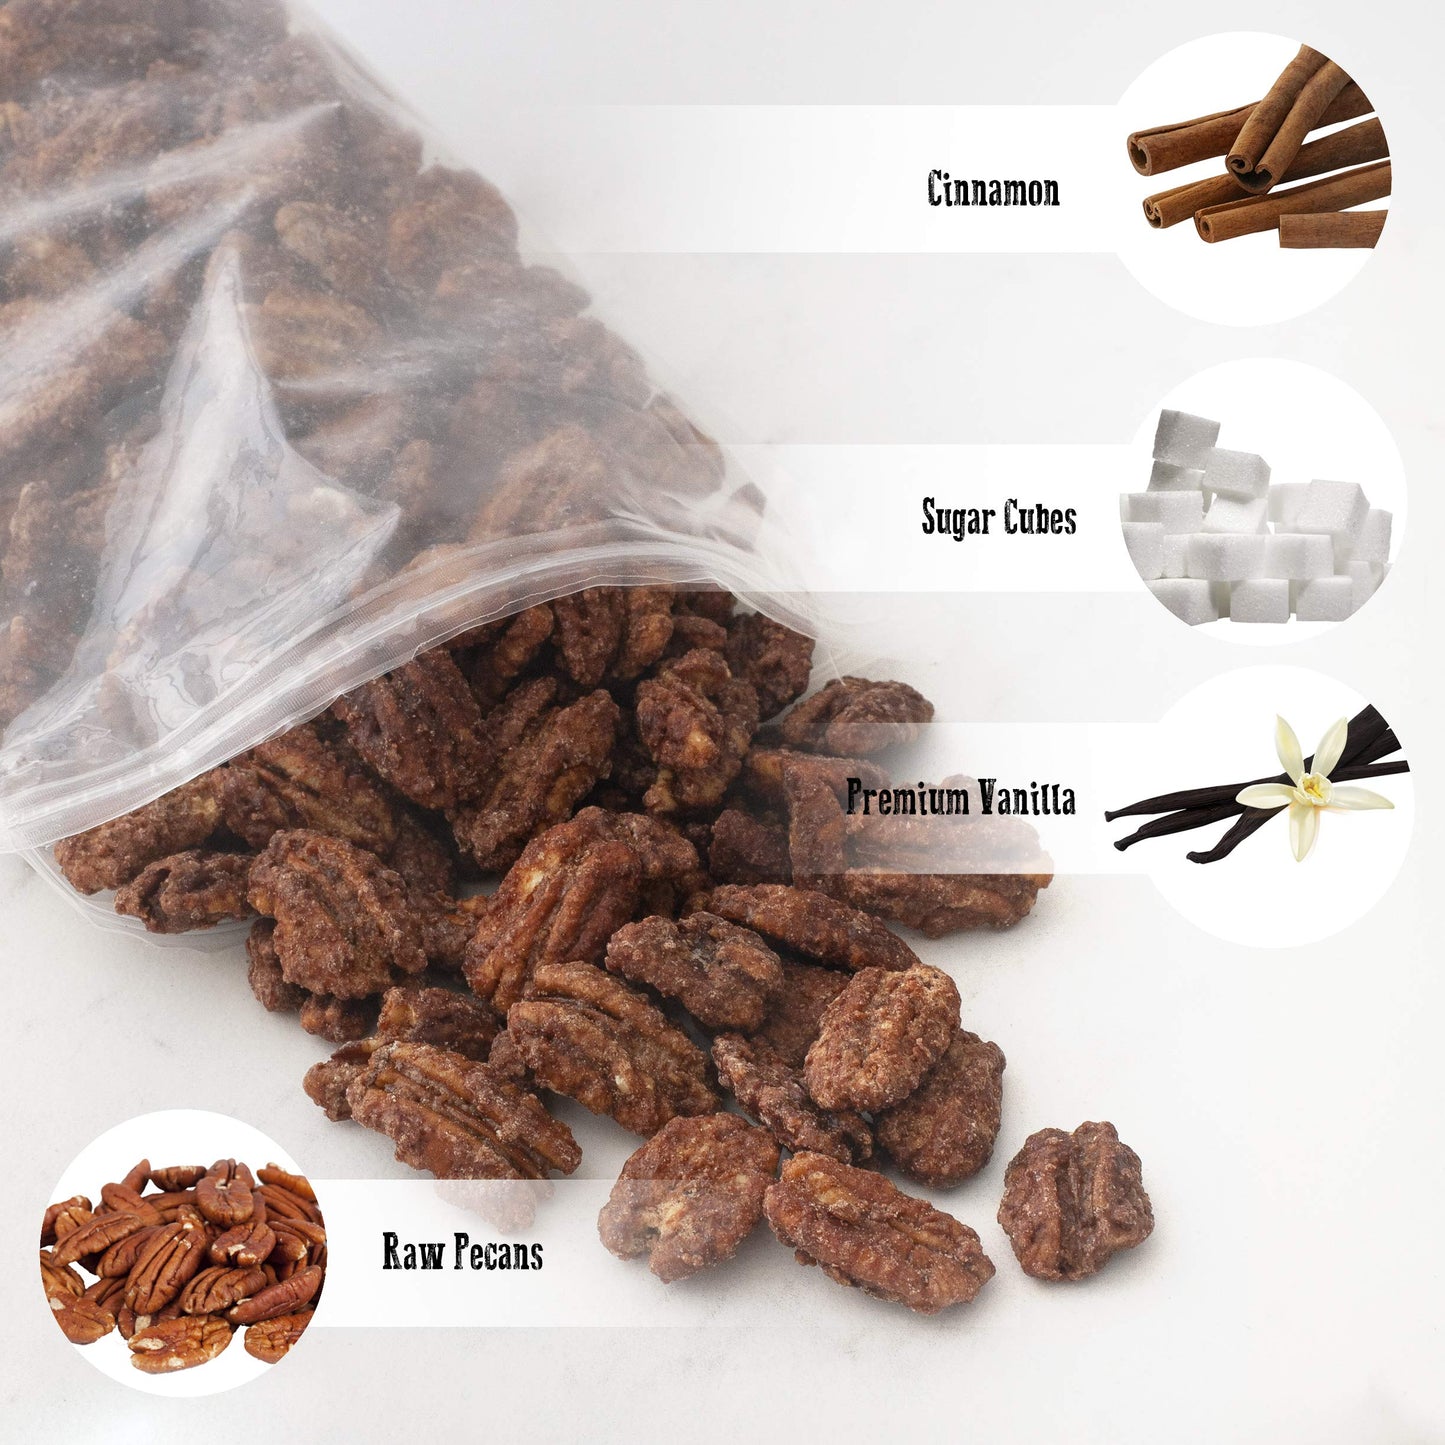 Gourmet Cinnamon Roasted Pecans 24 oz (1.75 lb) Bag: Addictive Snack/Treat to Satisfy Your Sweet Tooth | Artisan Hand-Roasted Nuts Fresh to Order by Pop’N Nuts